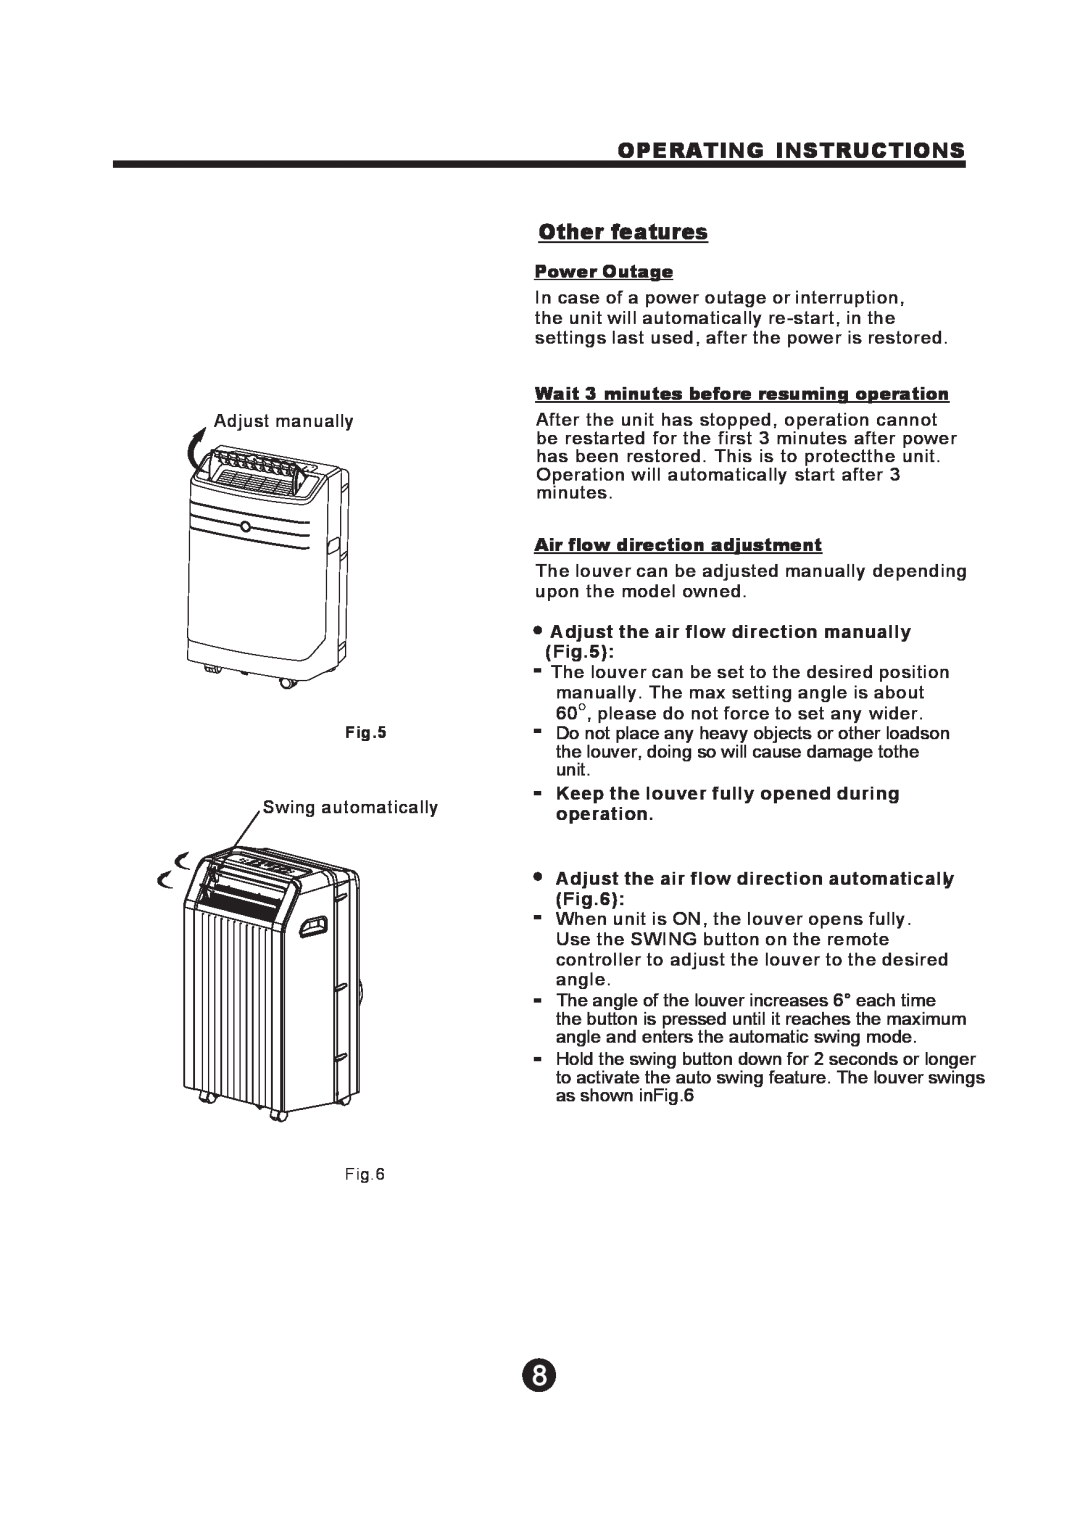 NewAir AC-12100E owner manual OPERATING INSTRUCTIONS Other features, Power Outage, Wait 3 minutes before resuming operation 